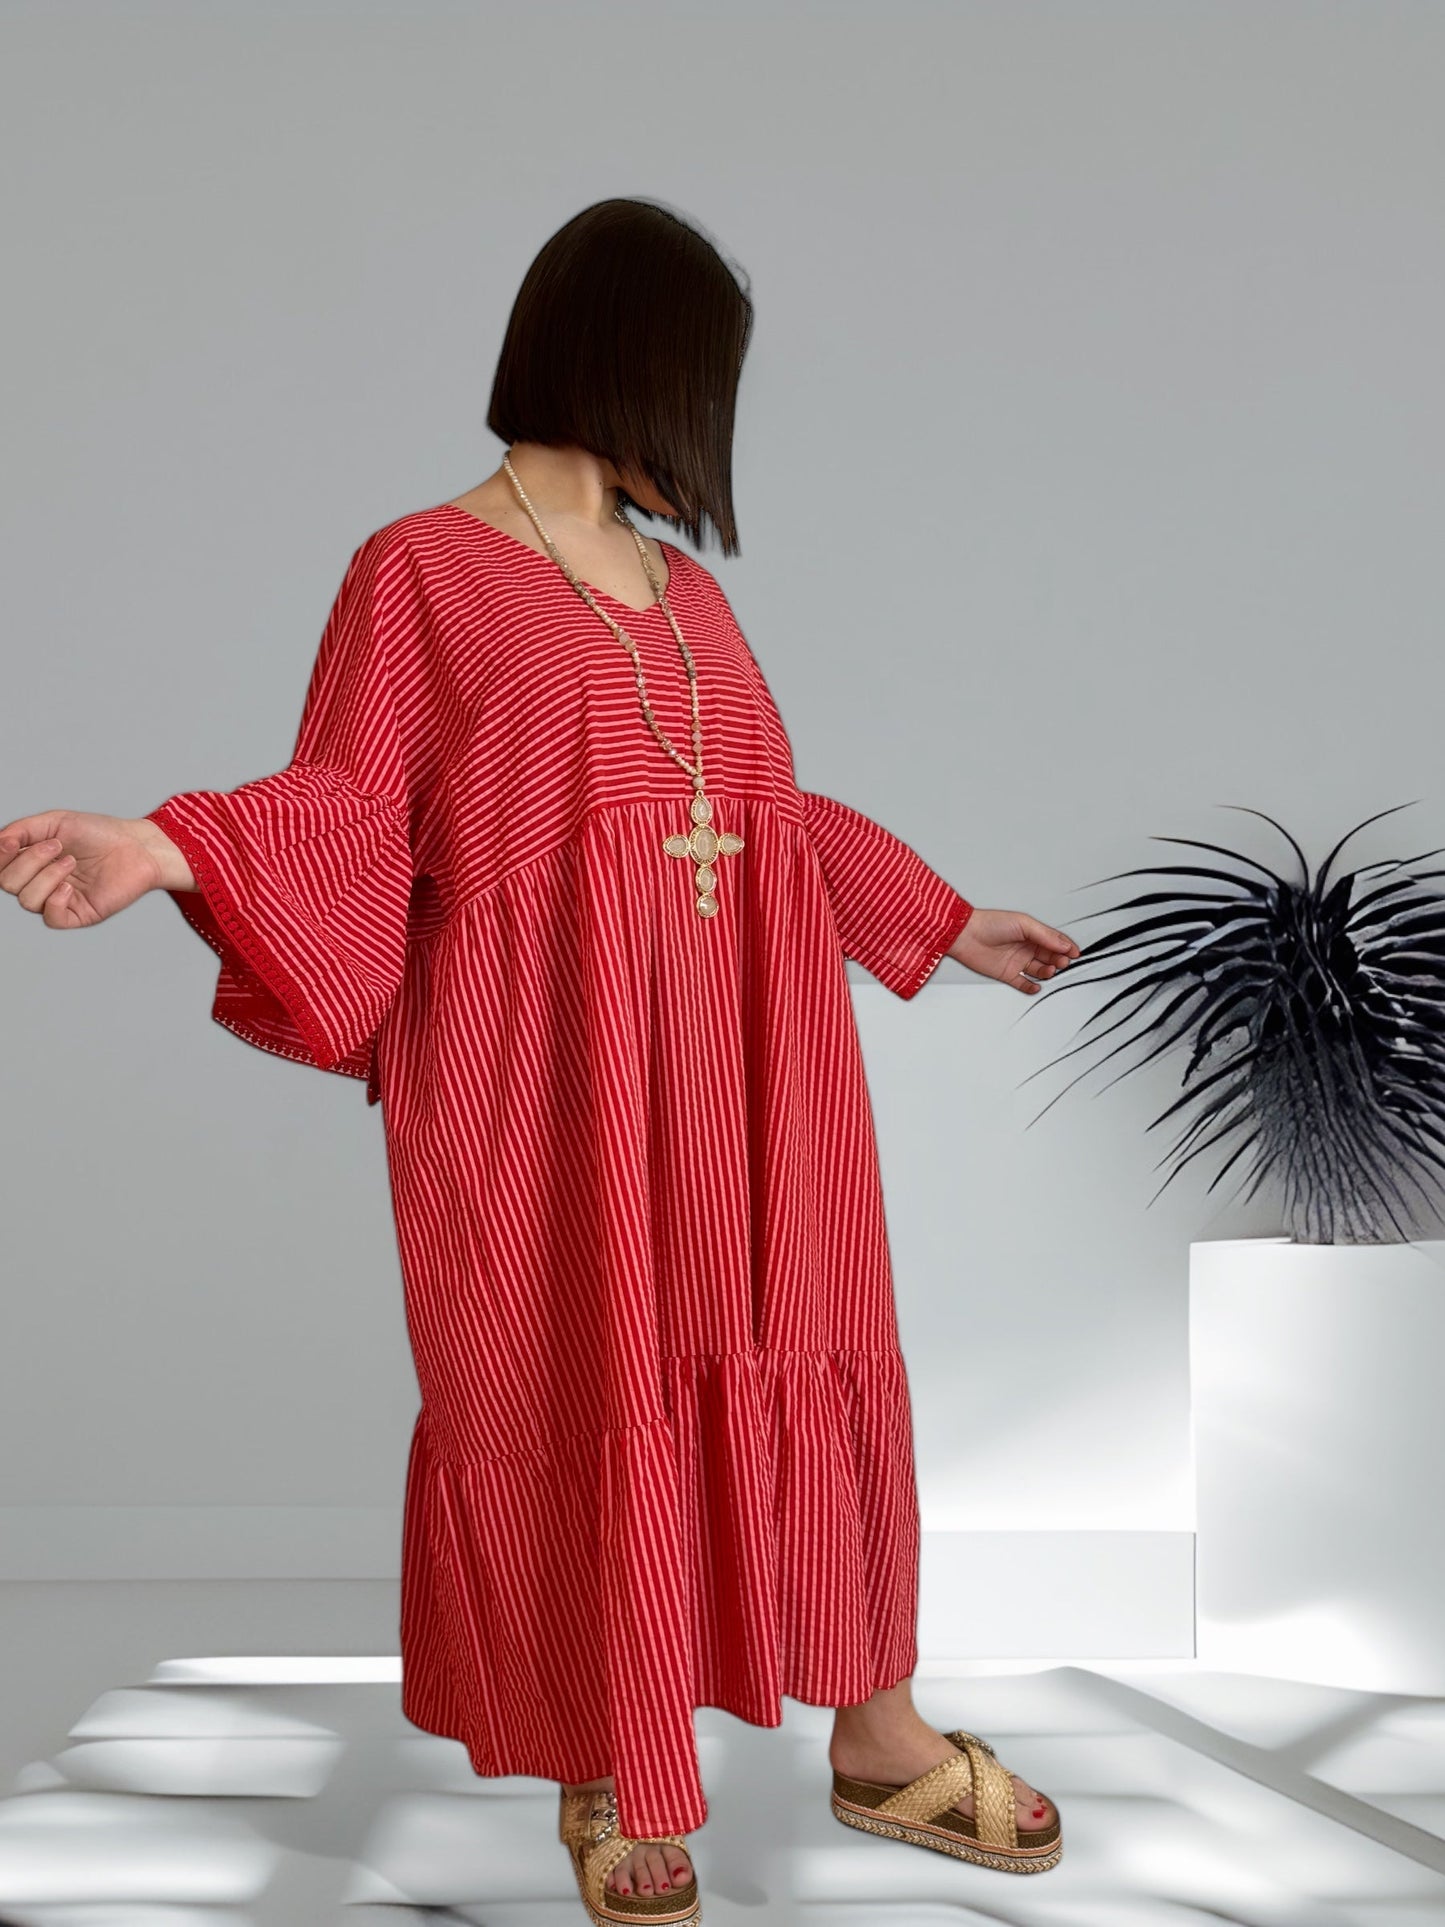 DONNA - ROBE ROUGE A RAYURE JUSQU'A LA TAILLE 46/48 A 56